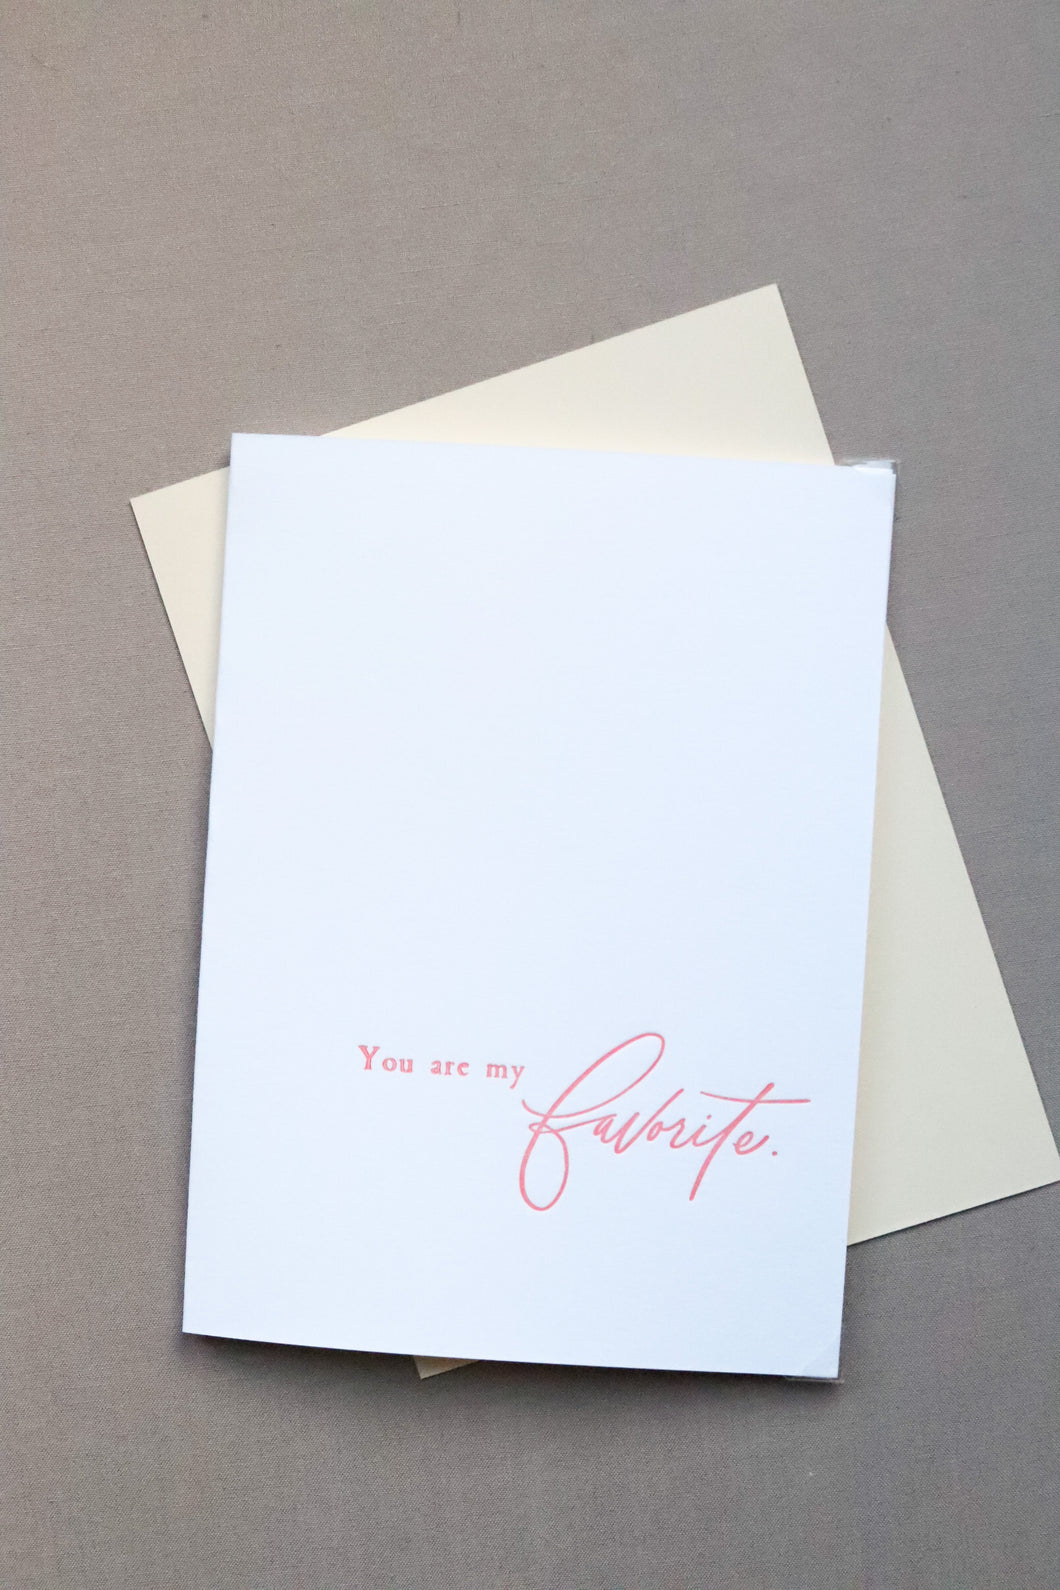 You are my favorite - Letterpress Card